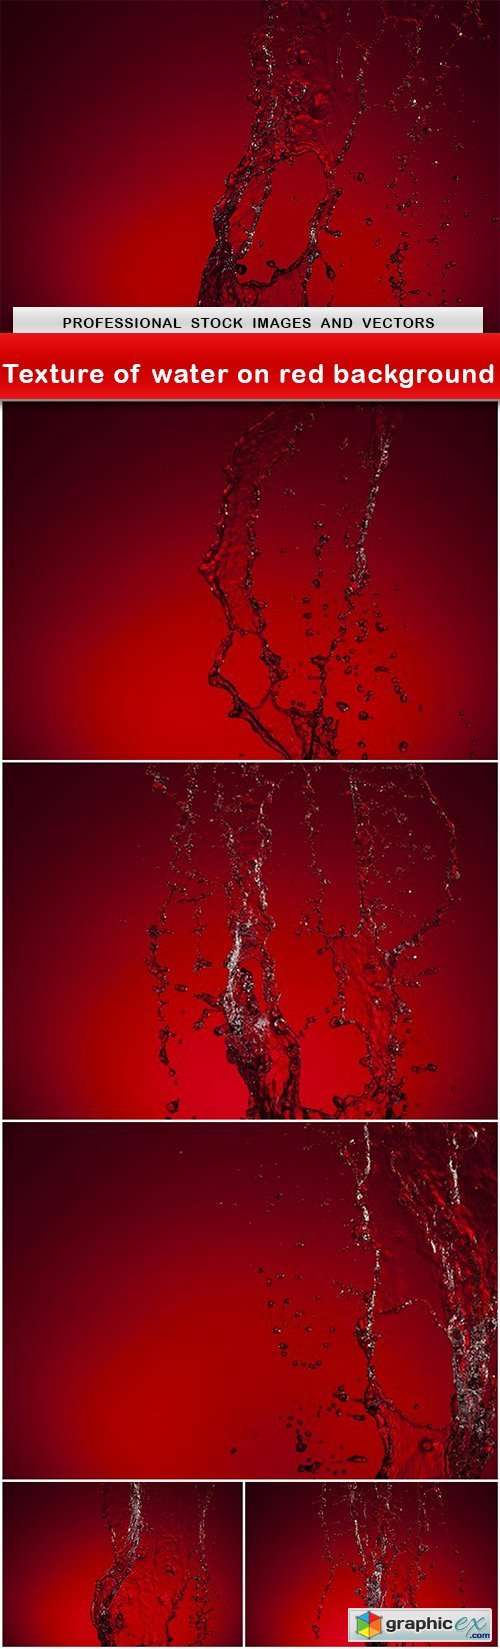 Texture of water on red background - 6 UHQ JPEG